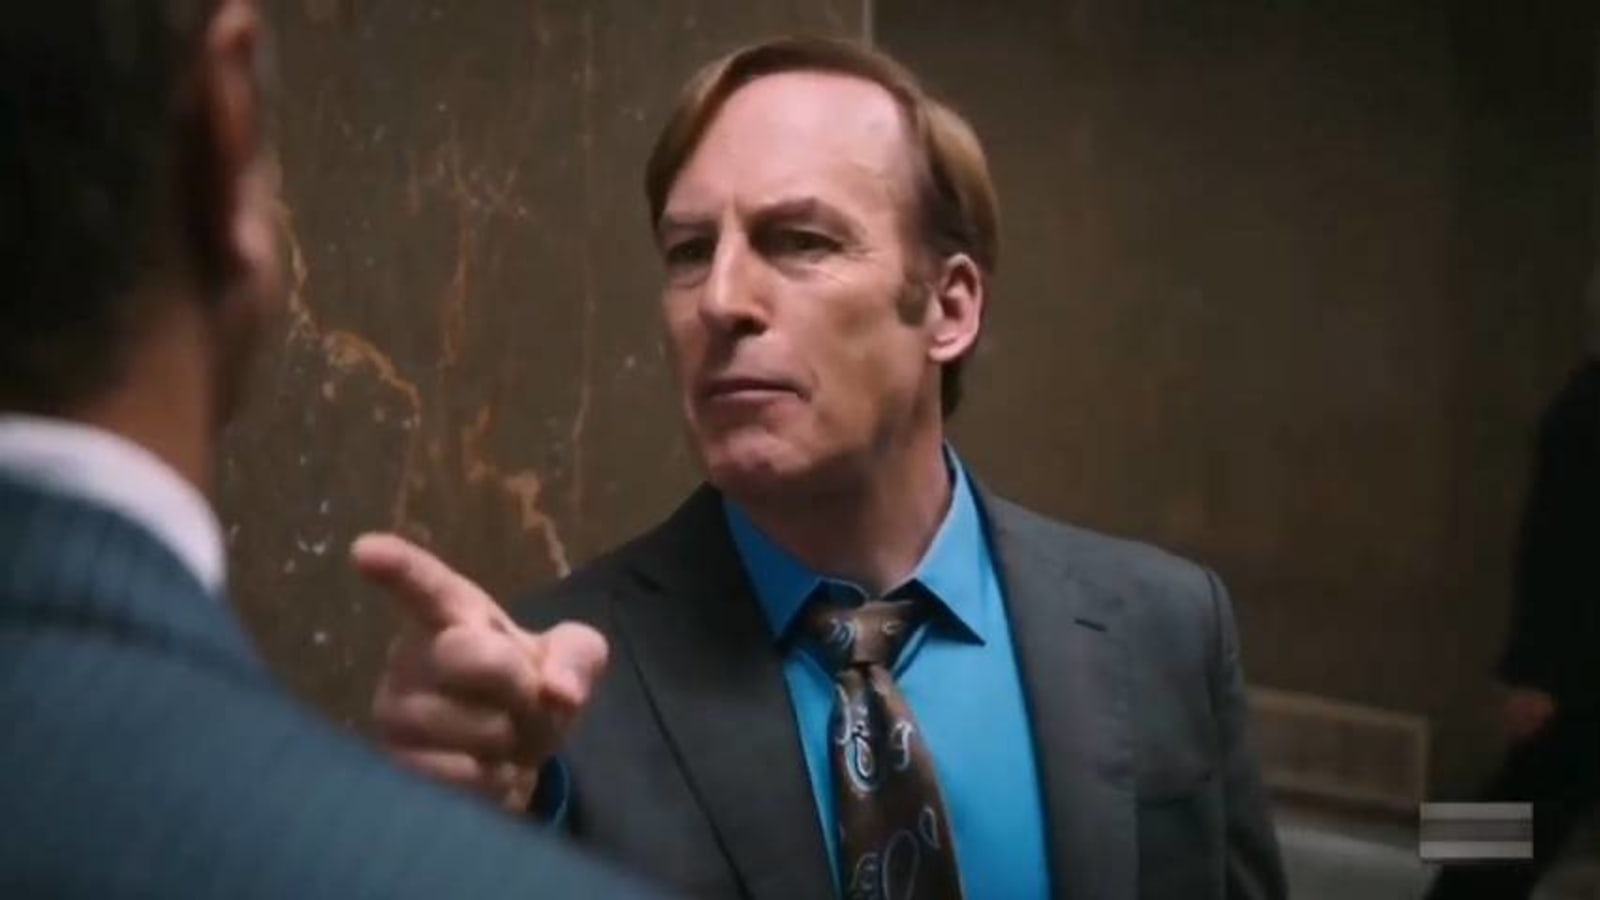 Bob Odenkirk doesn't know how 'Better Call Saul' ends: 'I want to be surprised'